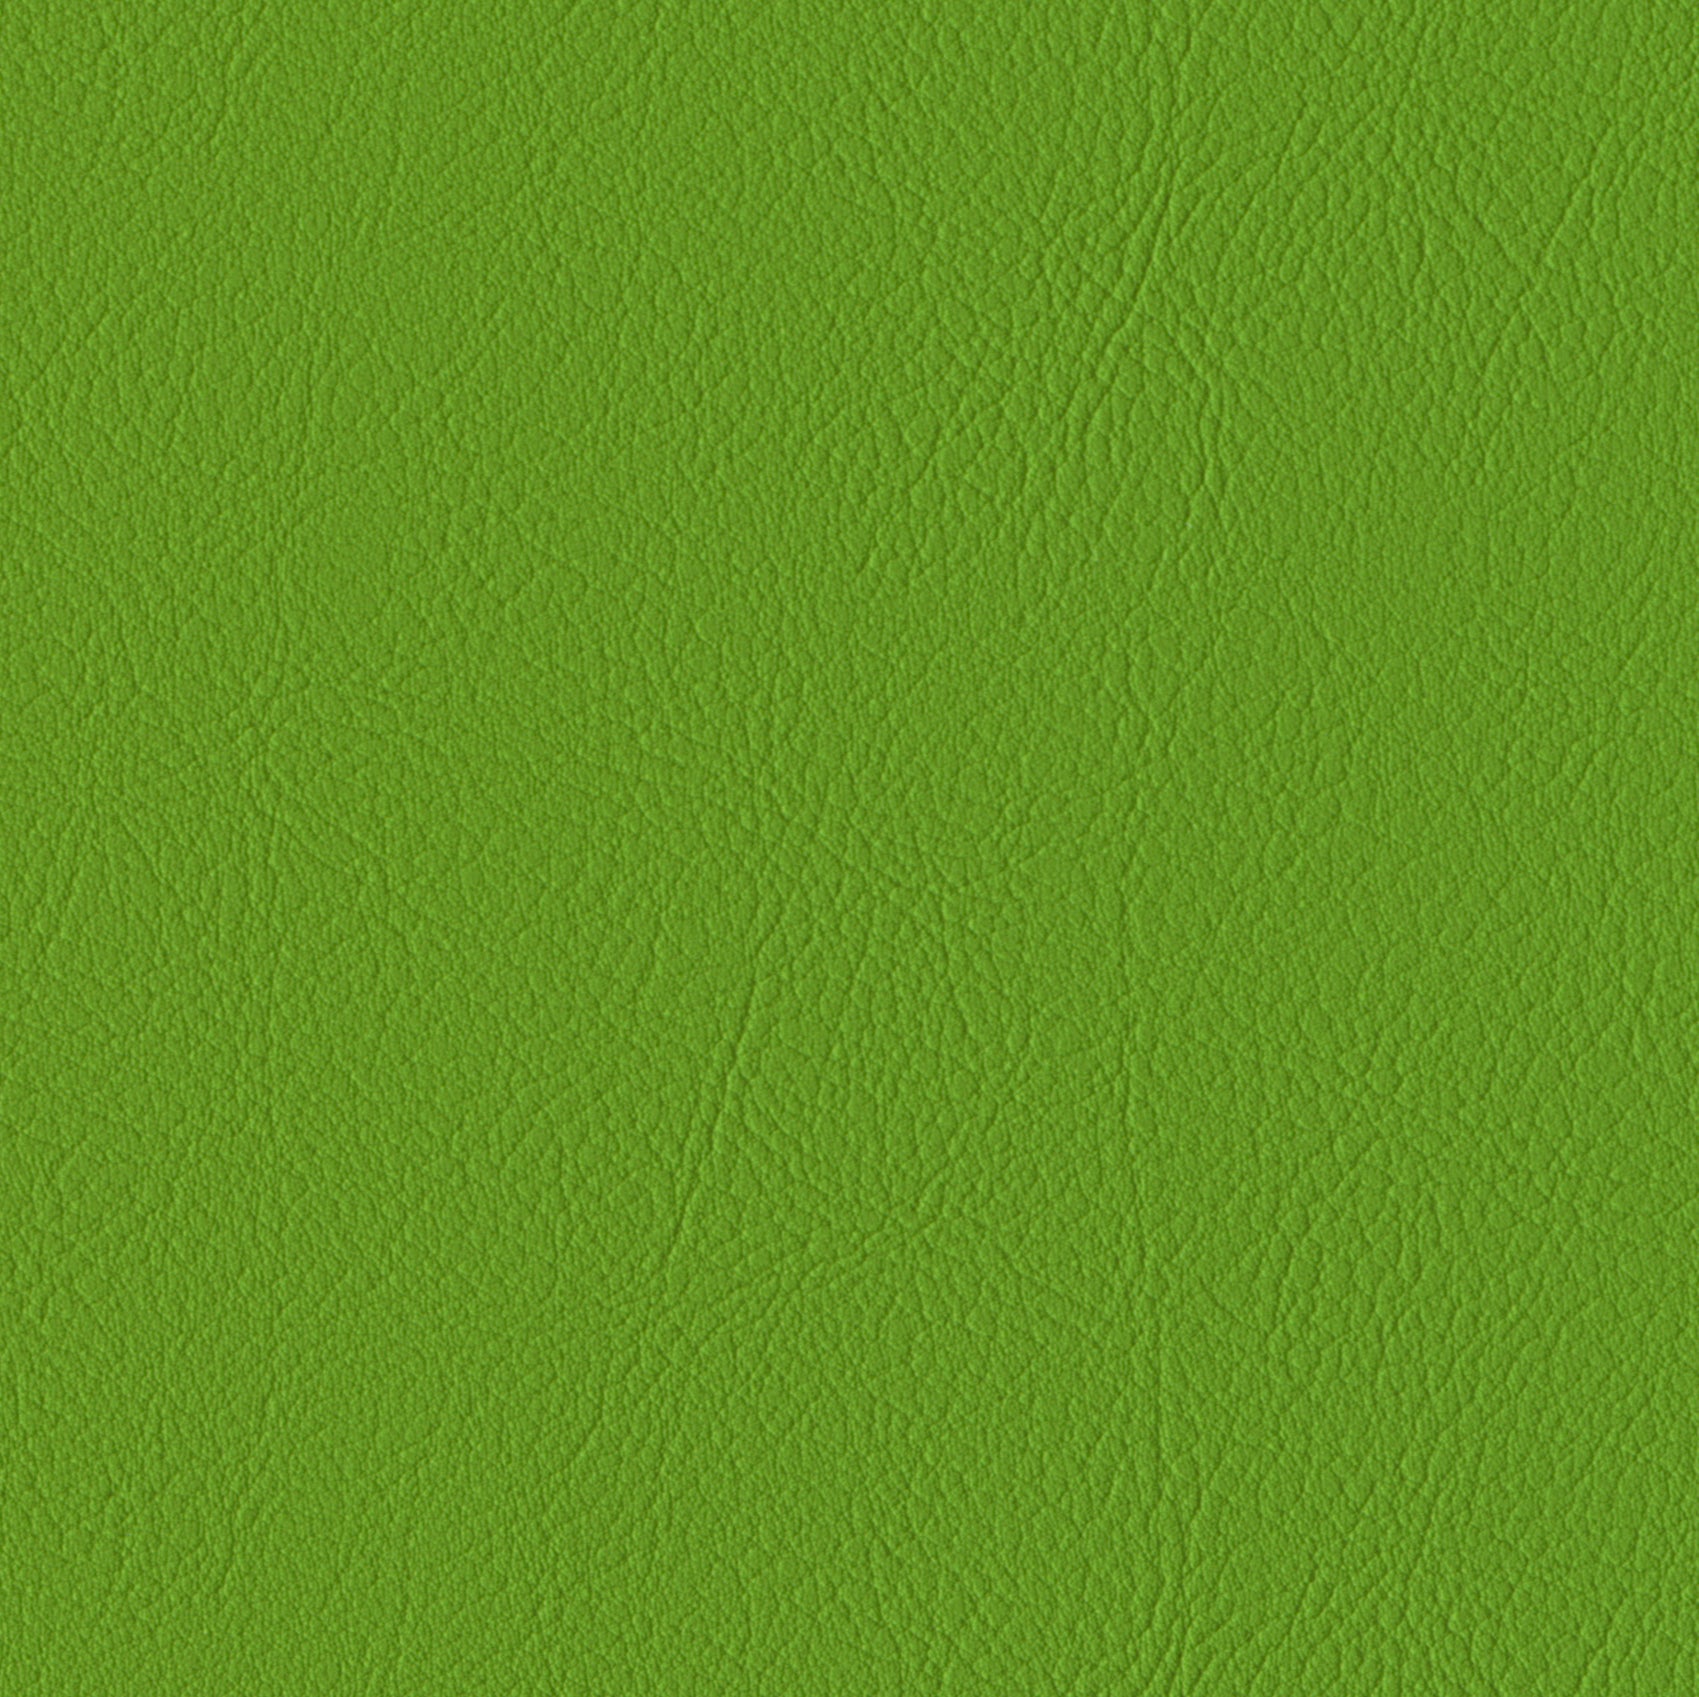    Andriali-Contract-Vinyl_Upholstery-Design-LegacyFR-Color-405LawnGreen-Width-140cm